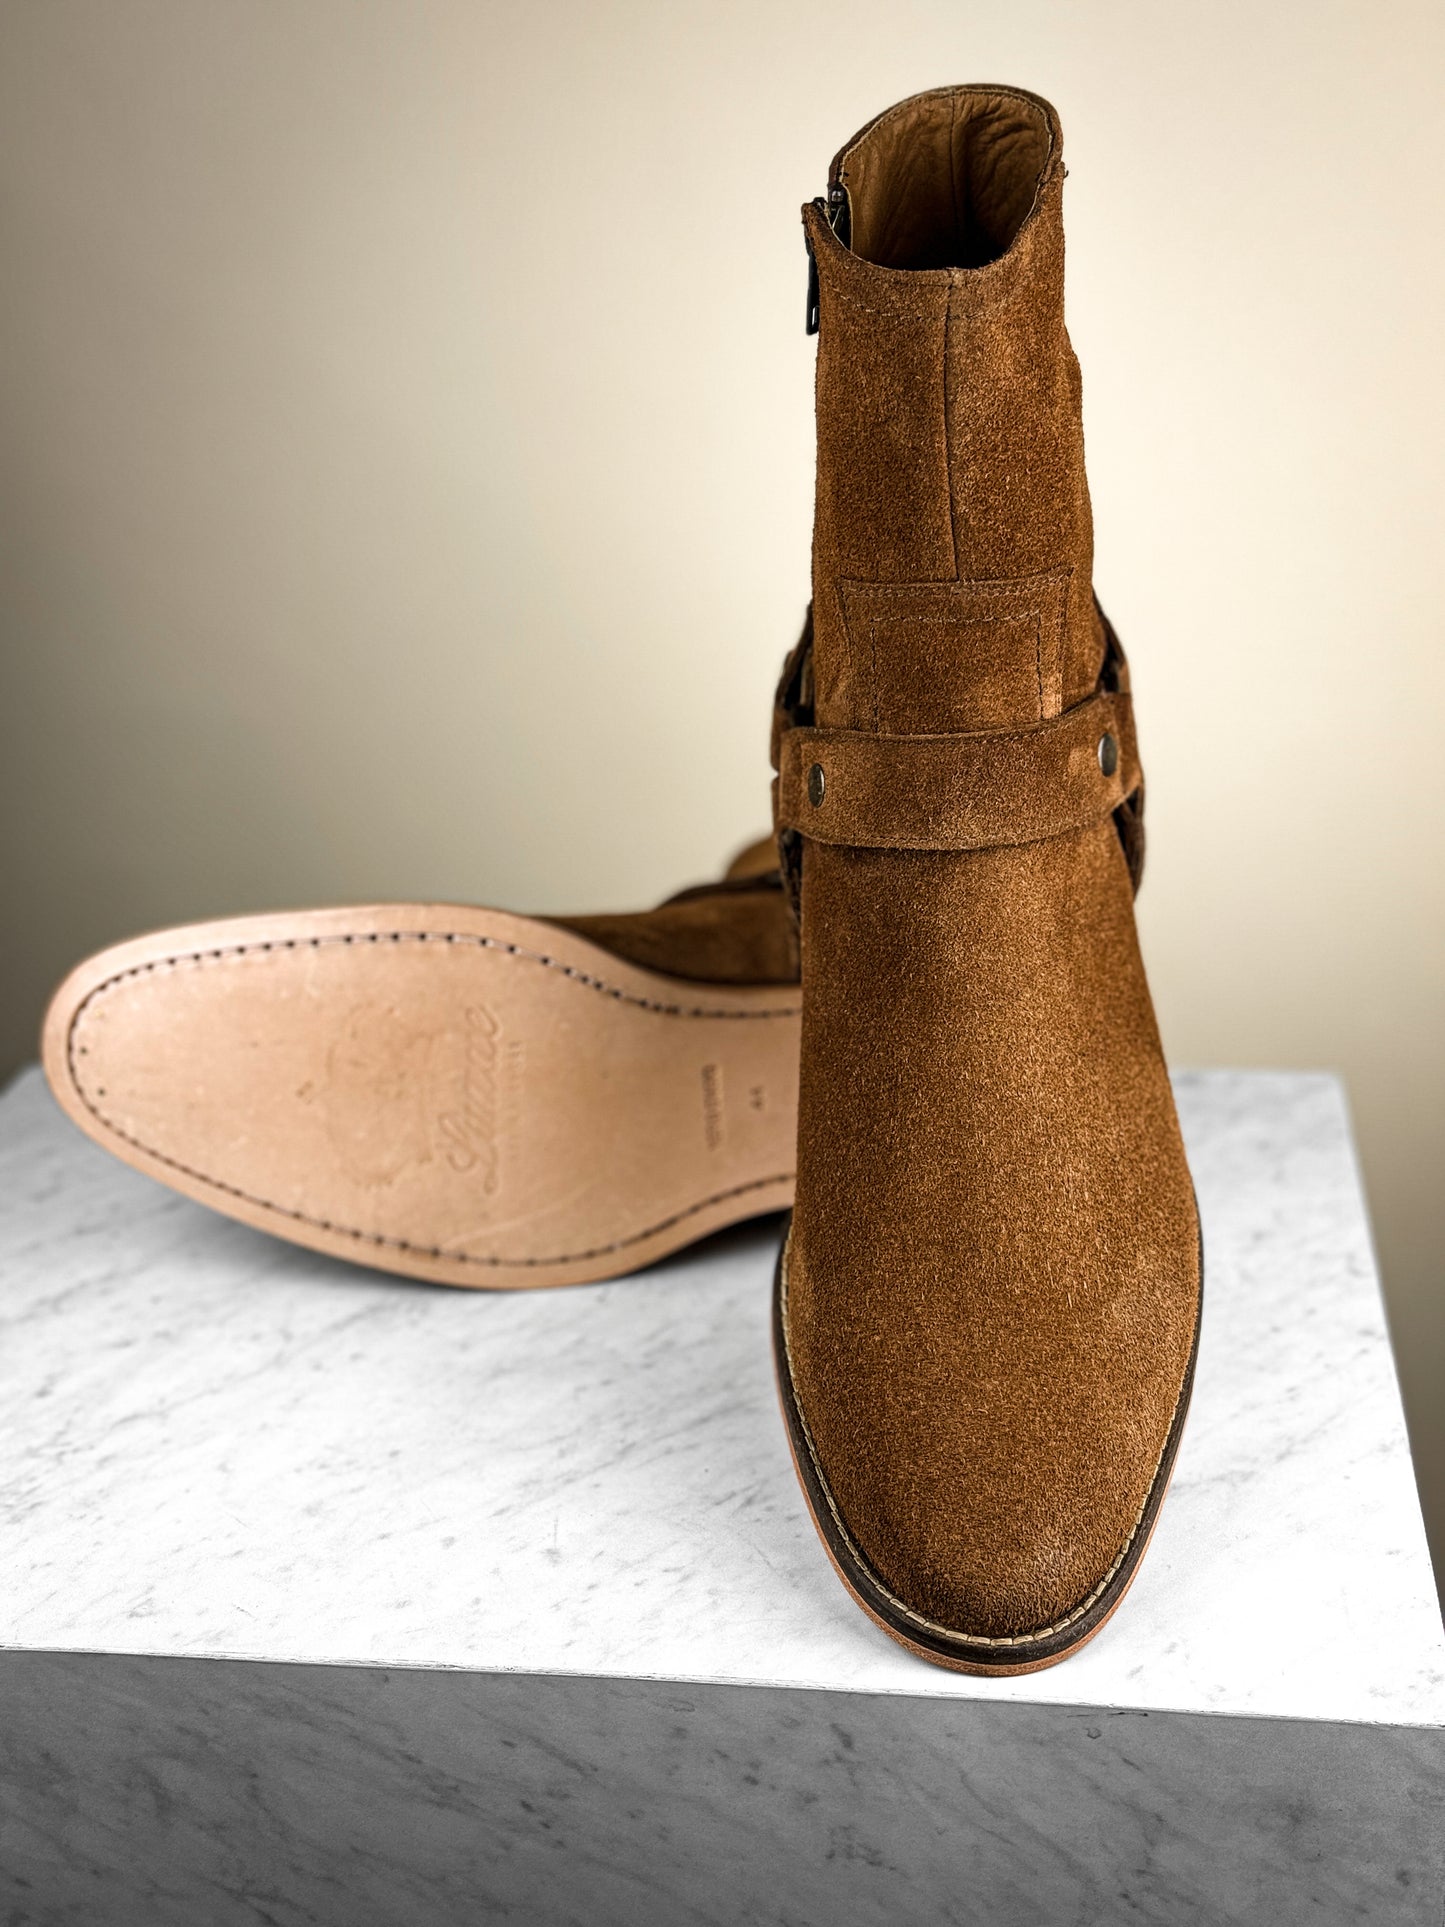 CHESTNUT CLASSIC BOOTS